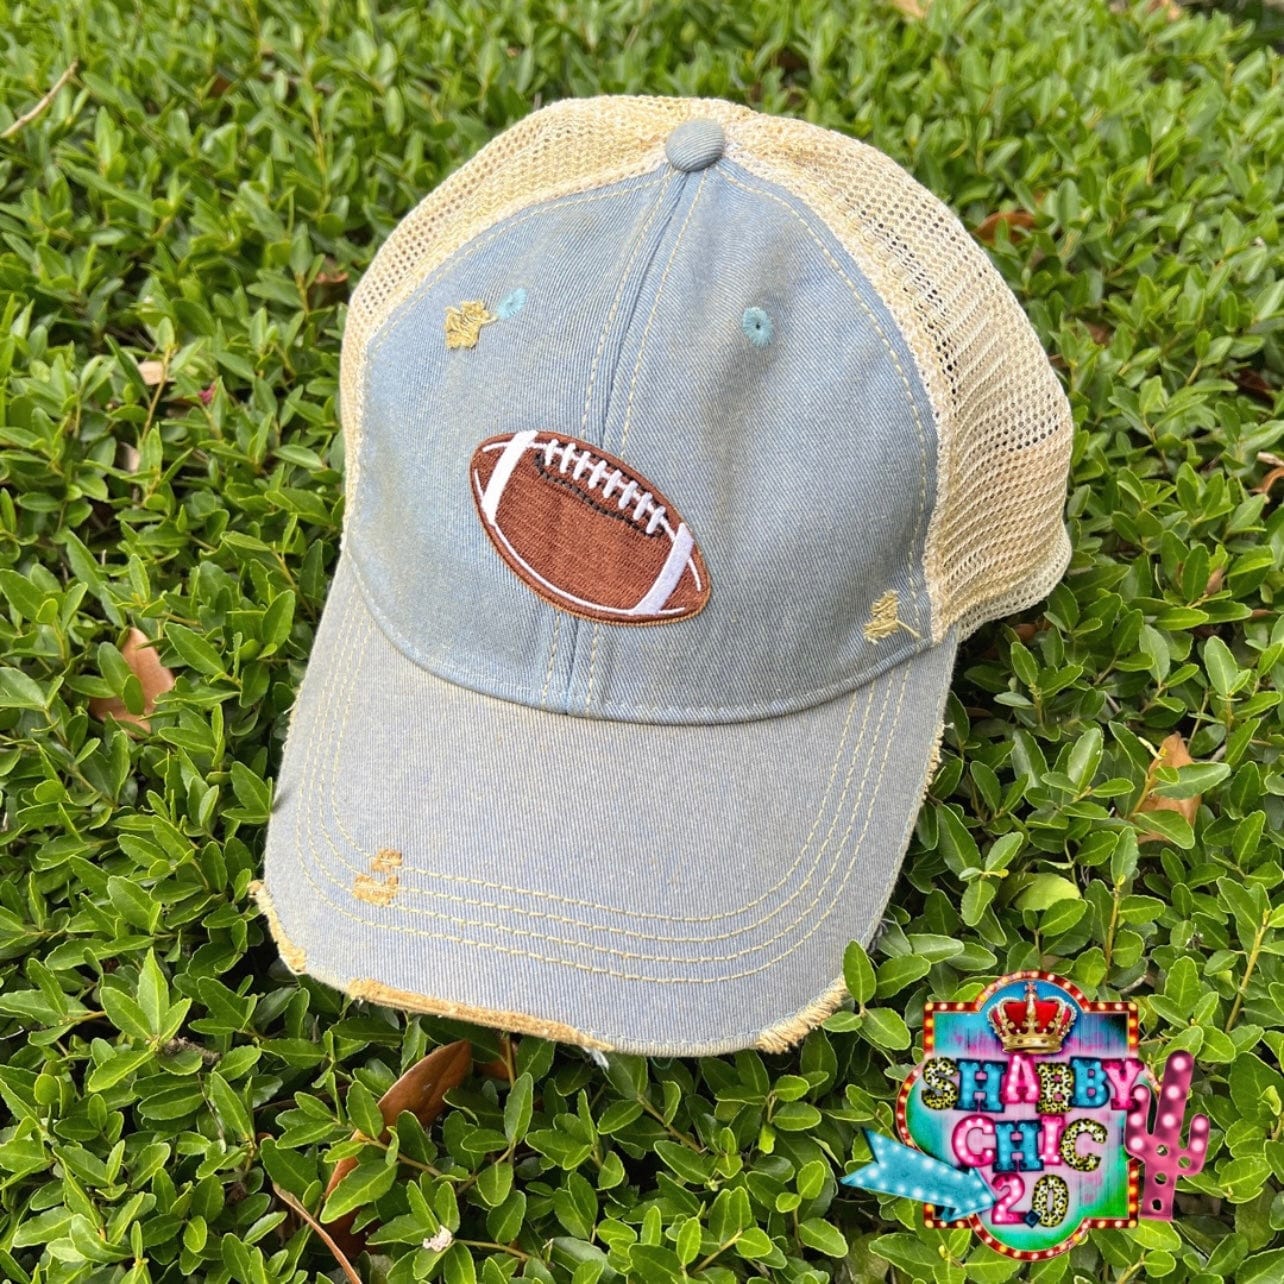 Football Cap - Light Blue Shabby Chic Boutique and Tanning Salon